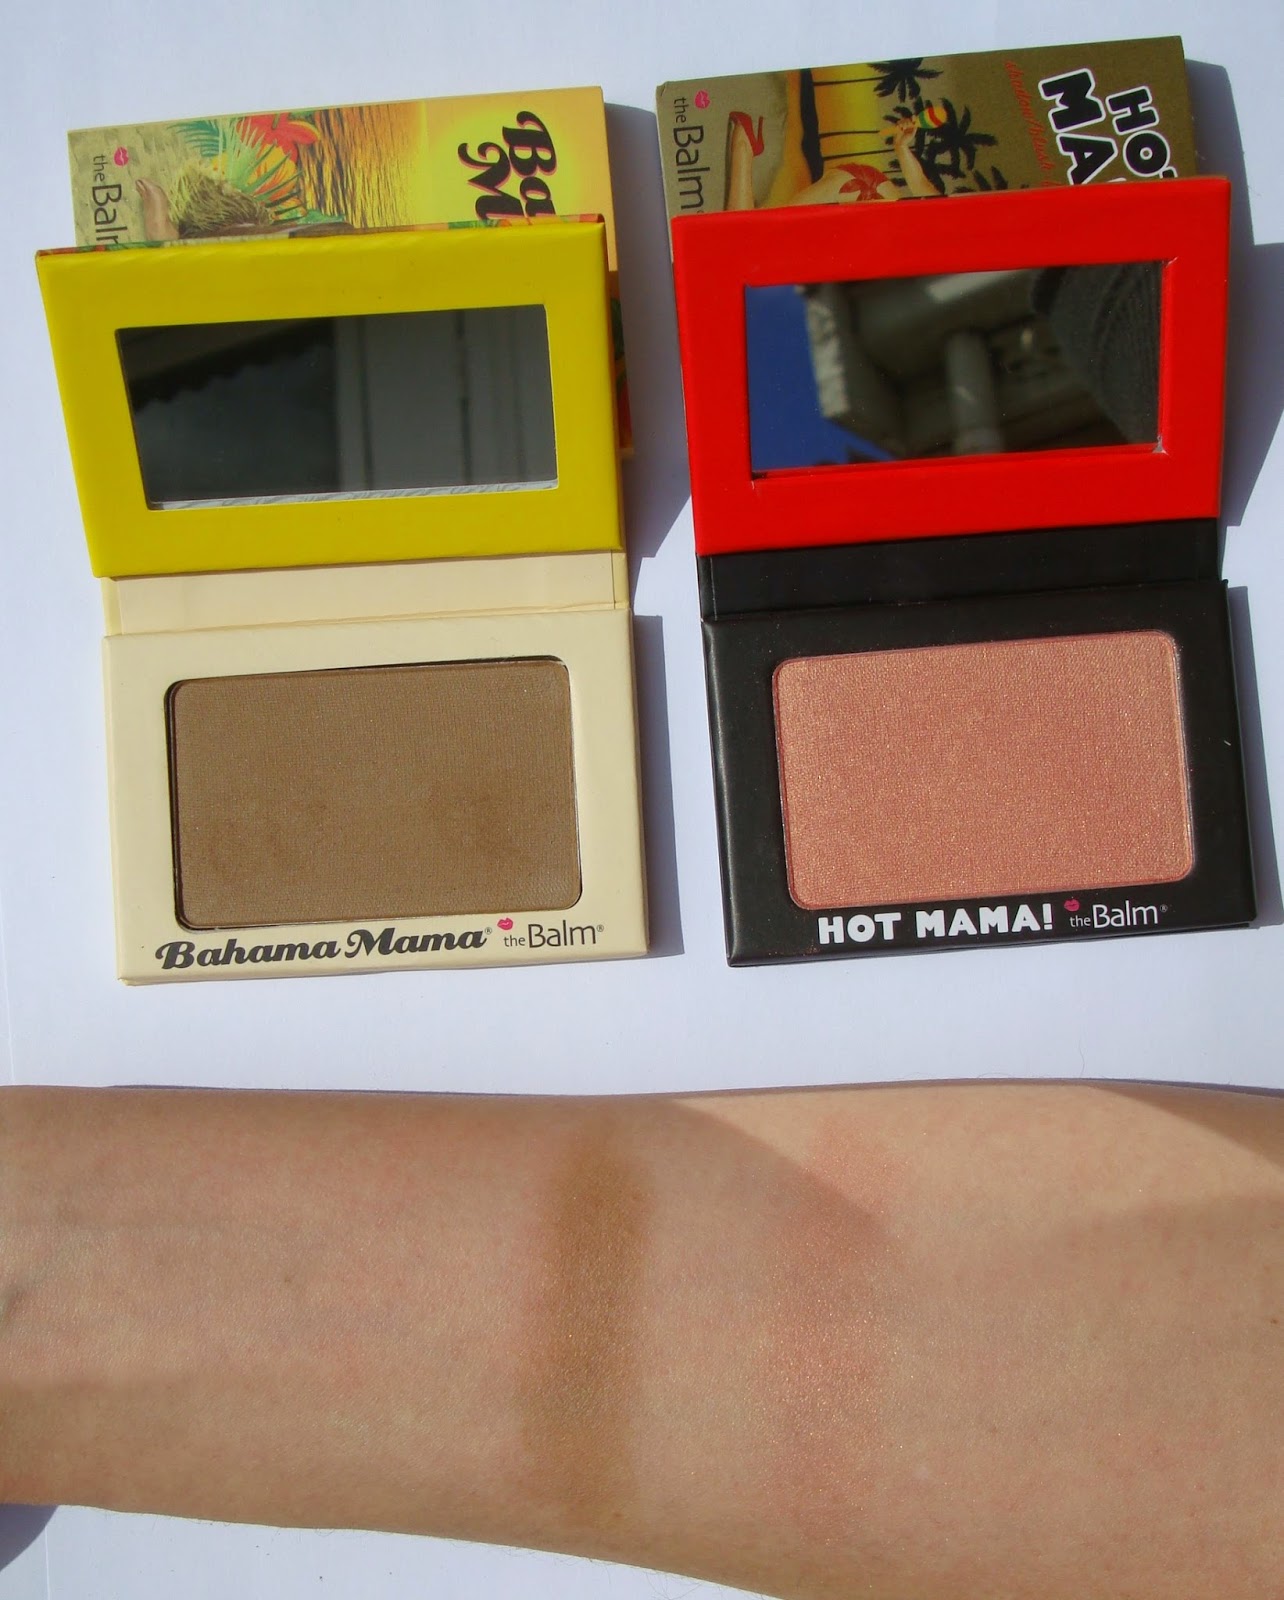 morder Stranden klodset little white truths: theBalm Bahama Mama Bronzer and Hot Mama Blush - review